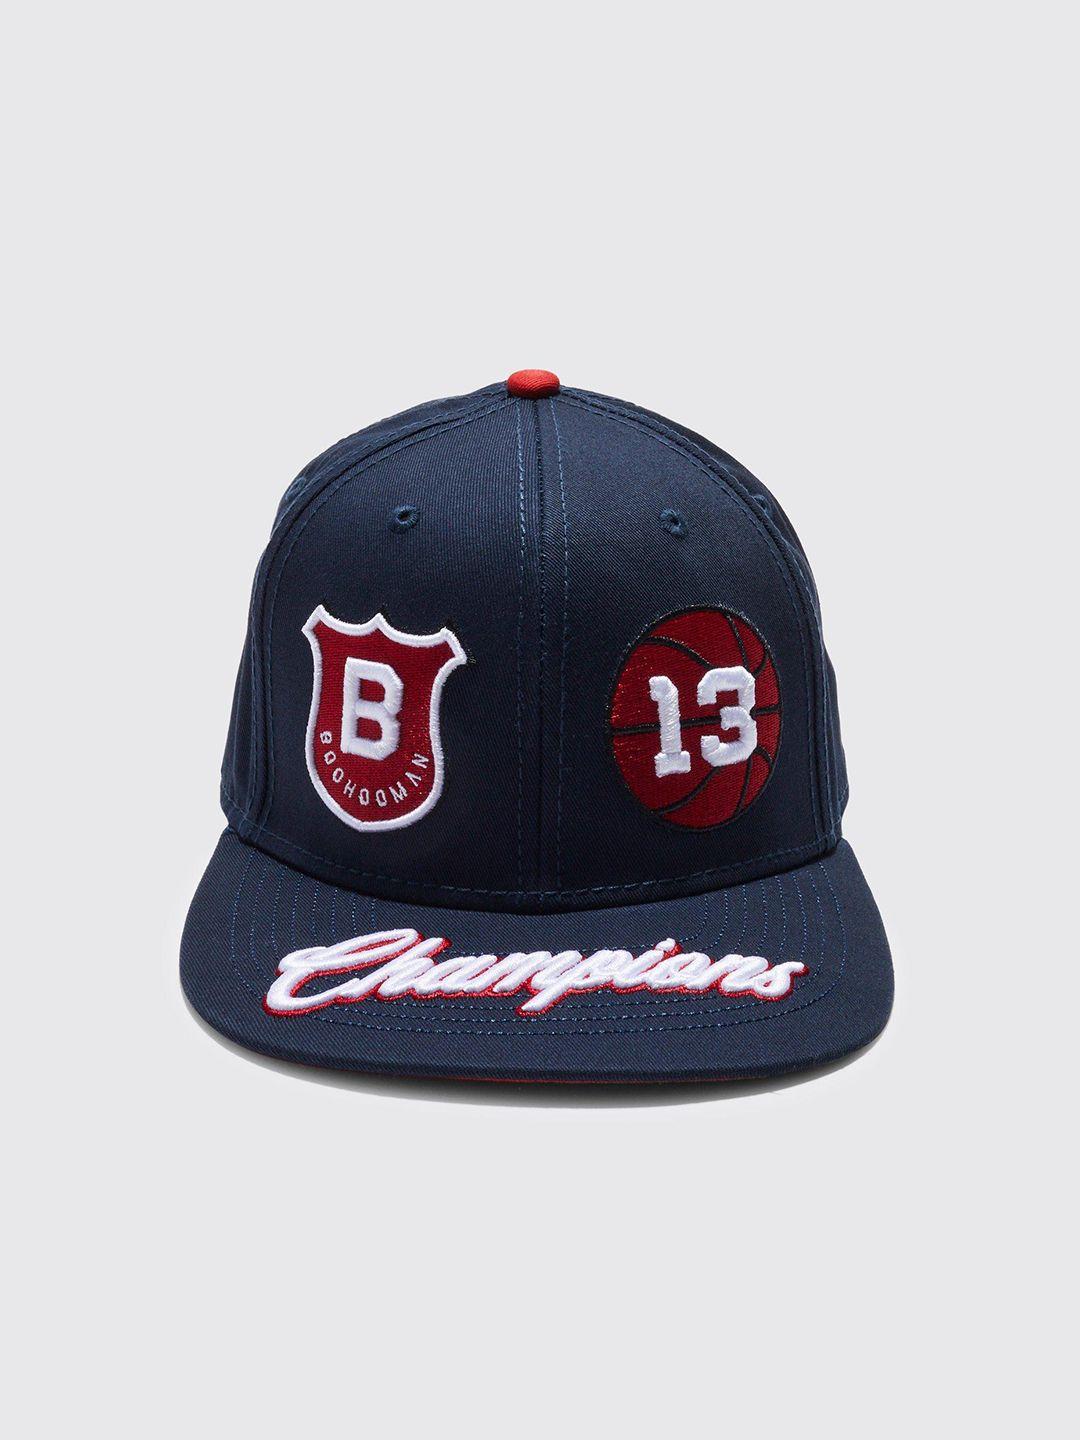 boohooman typography embroidered snapback cap with applique detail